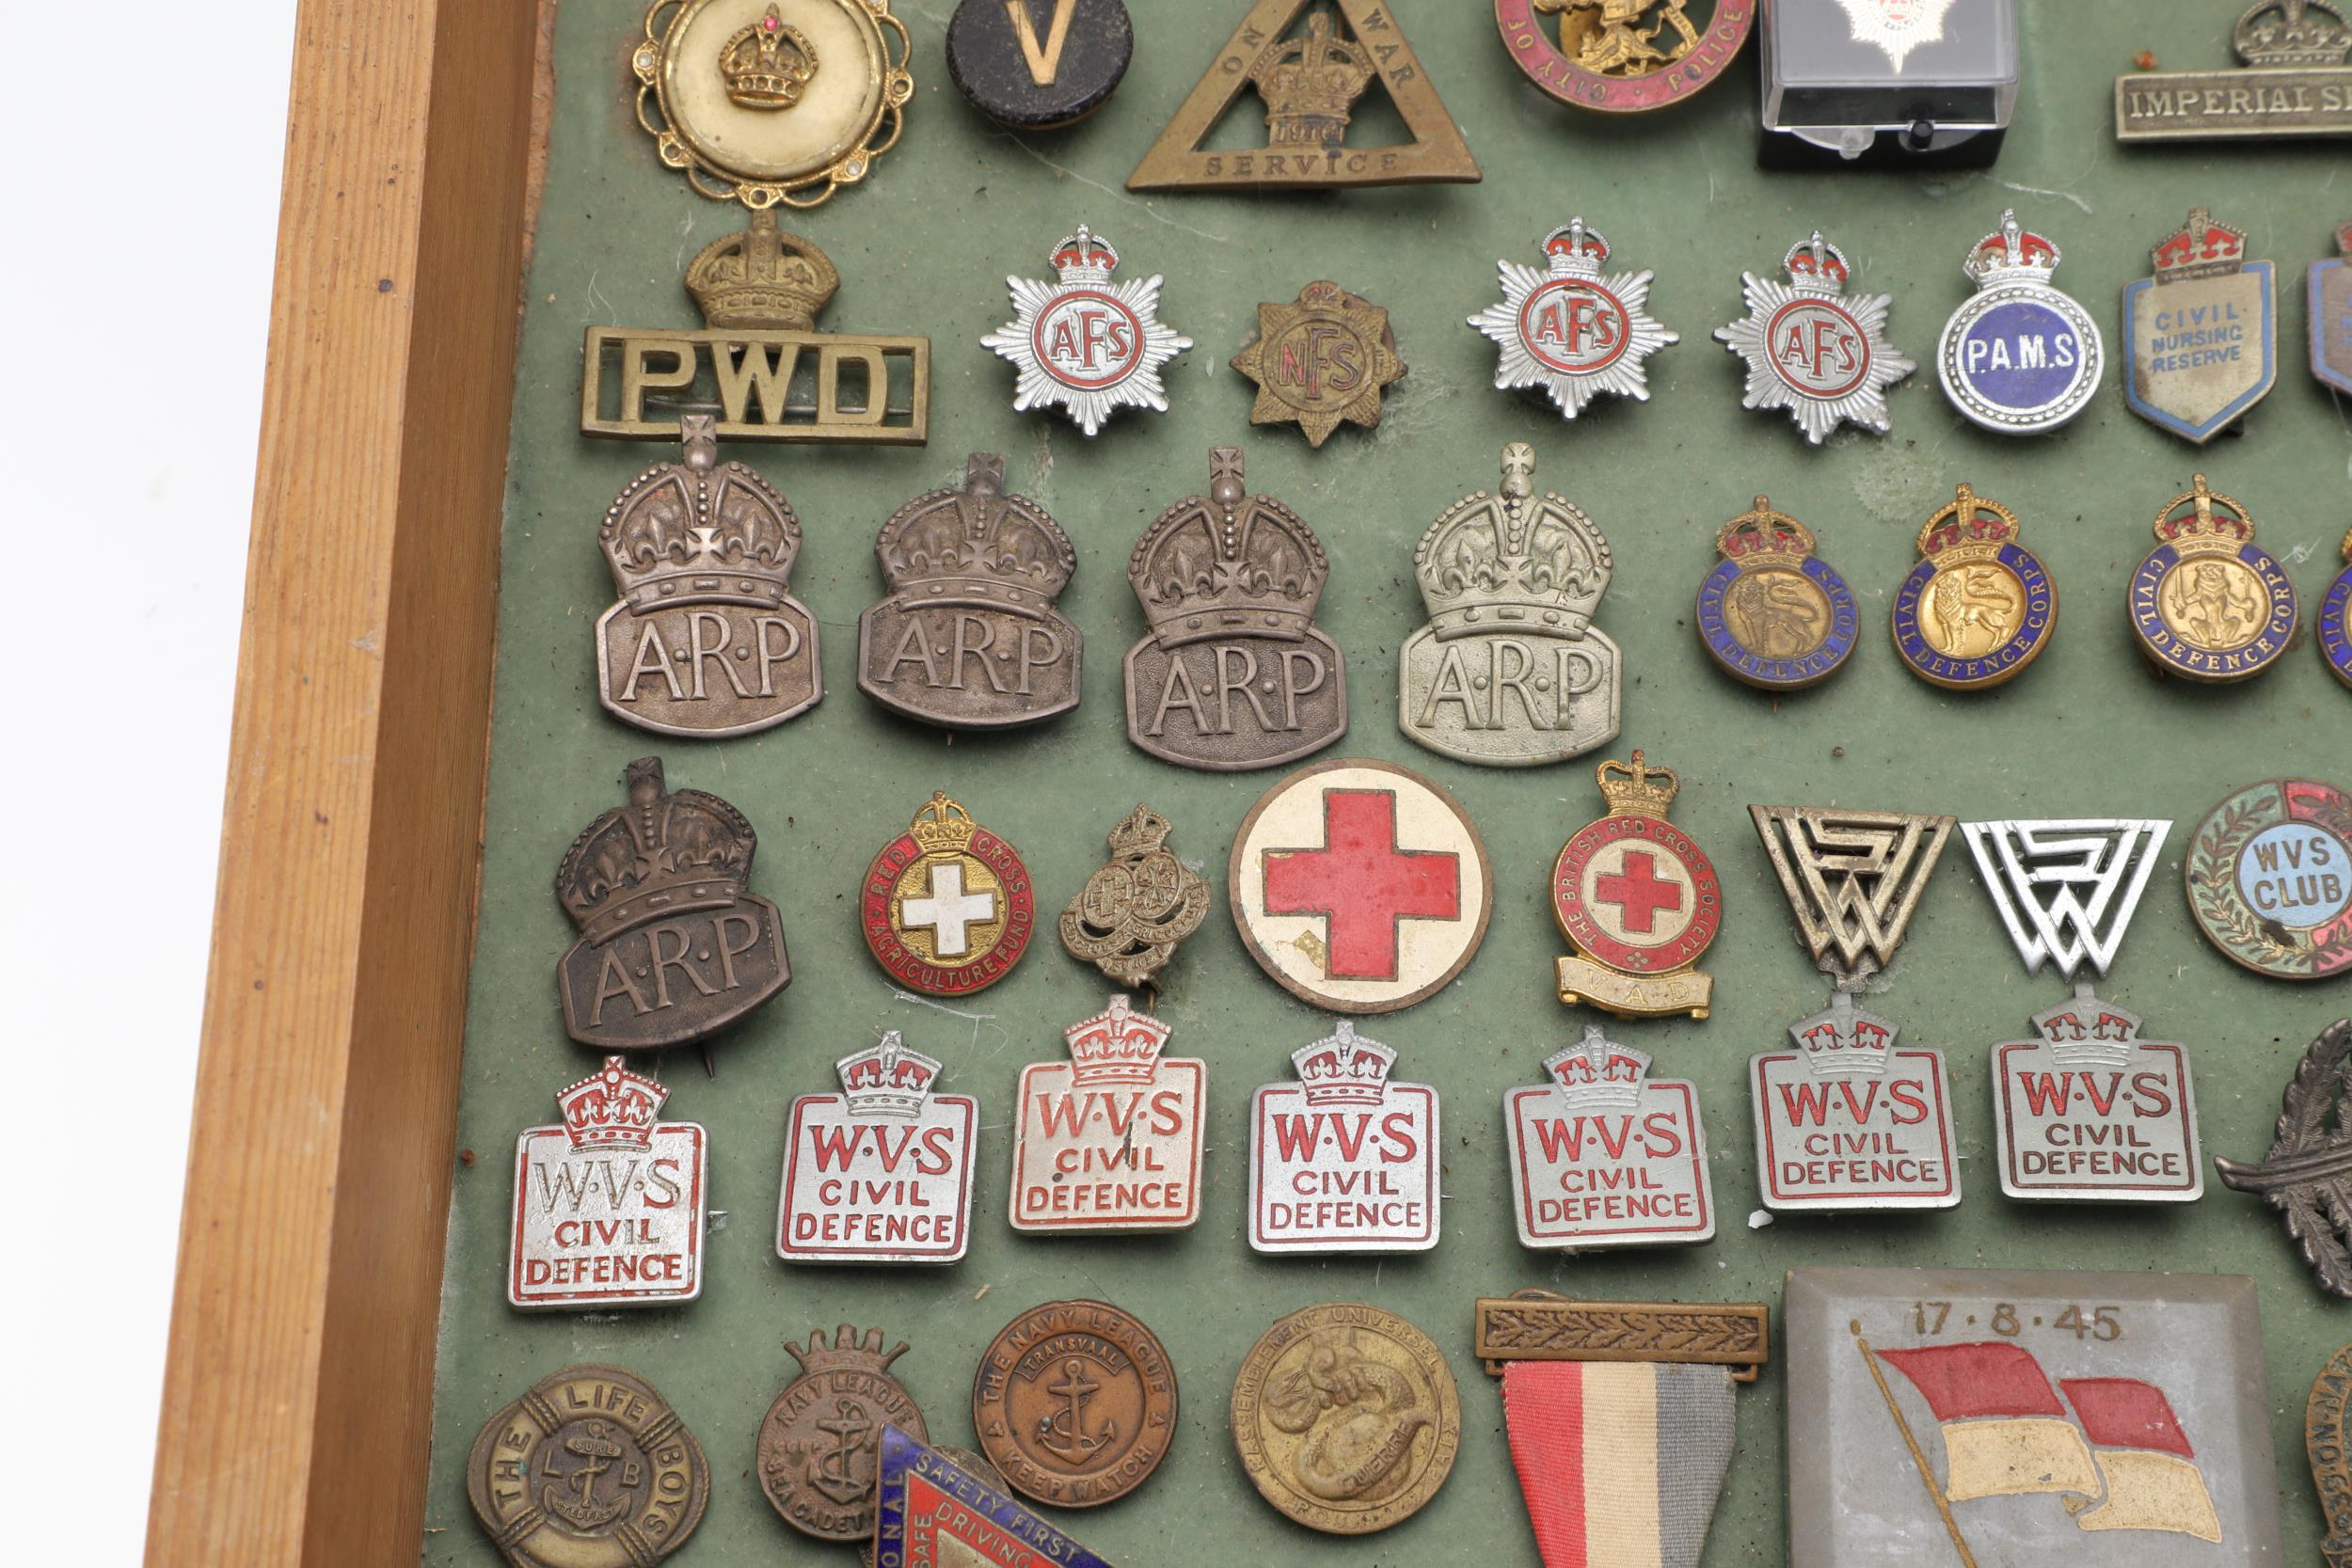 AN INTERESTING COLLECTION OF MILITARY RELATED ENAMEL AND SIMILAR BADGES. - Image 4 of 7